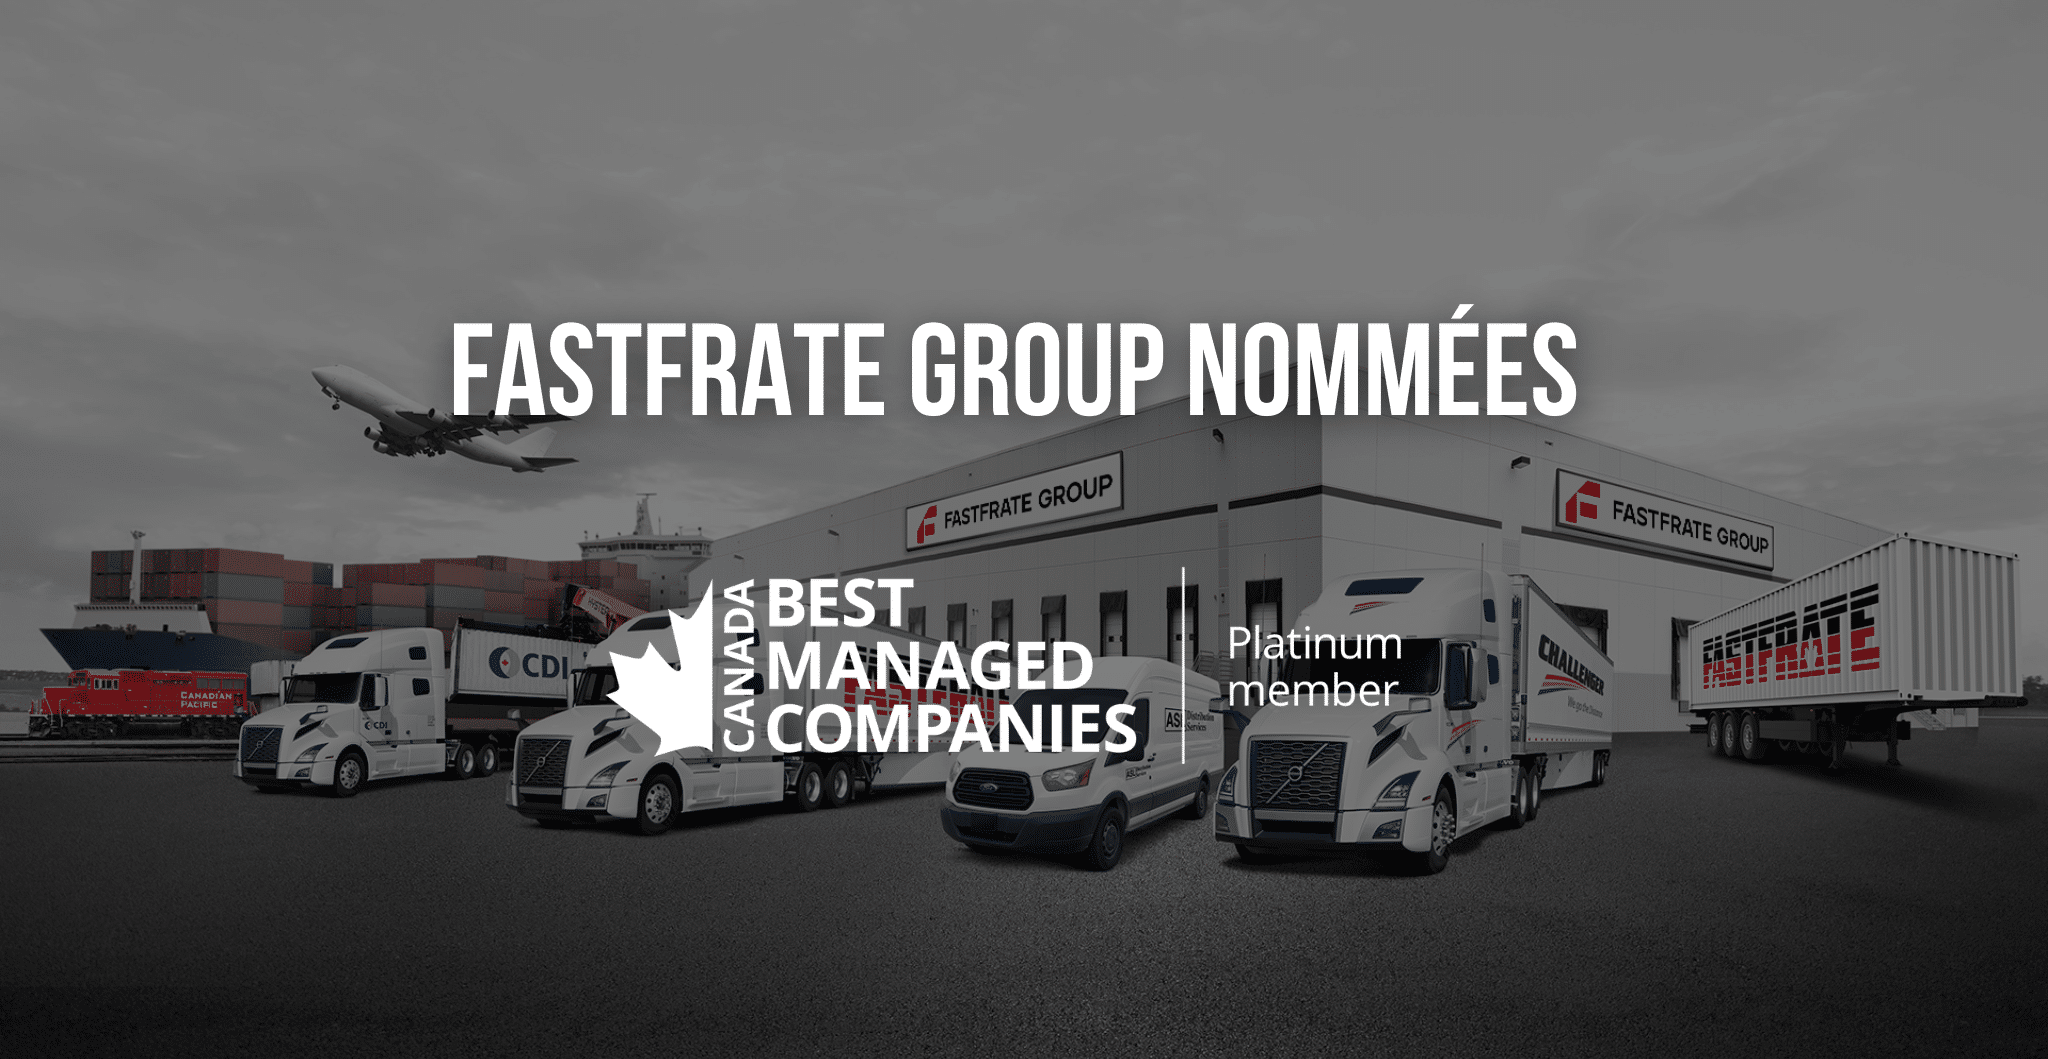 Fastfrate Group Recognized as Canada's Best Managed